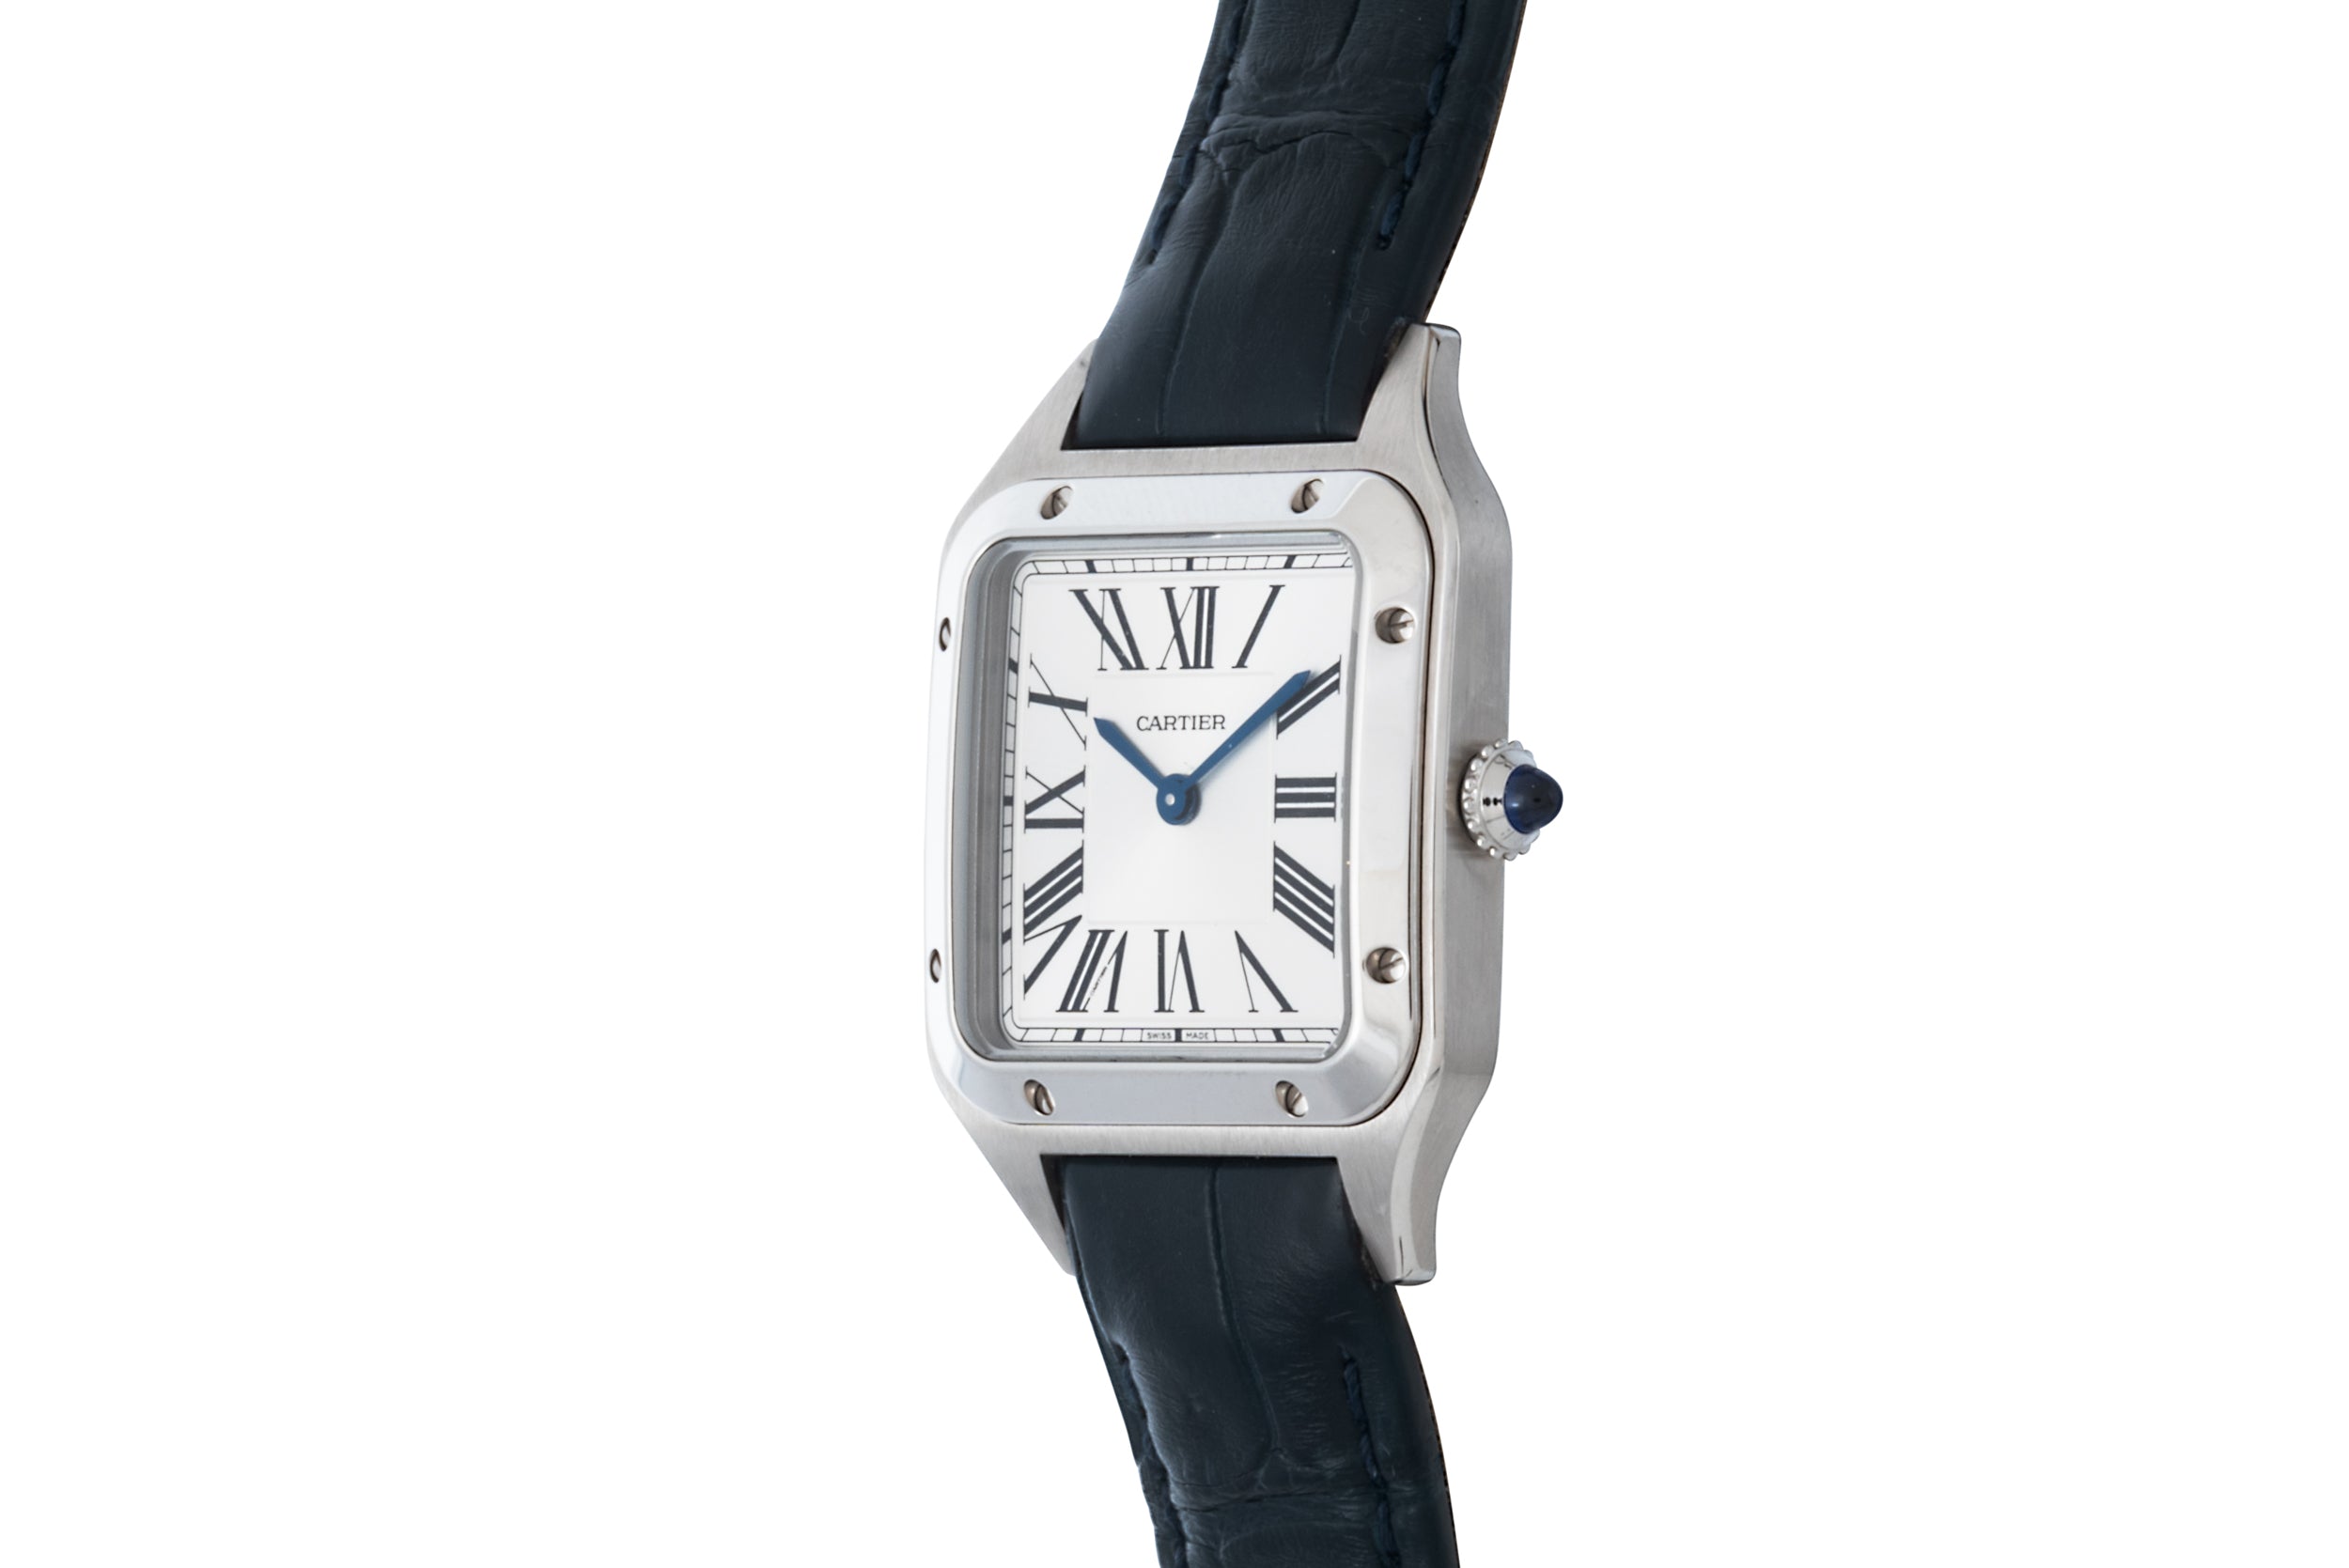 Cartier Santos Watches for Sale - Authenticity Guaranteed - eBay